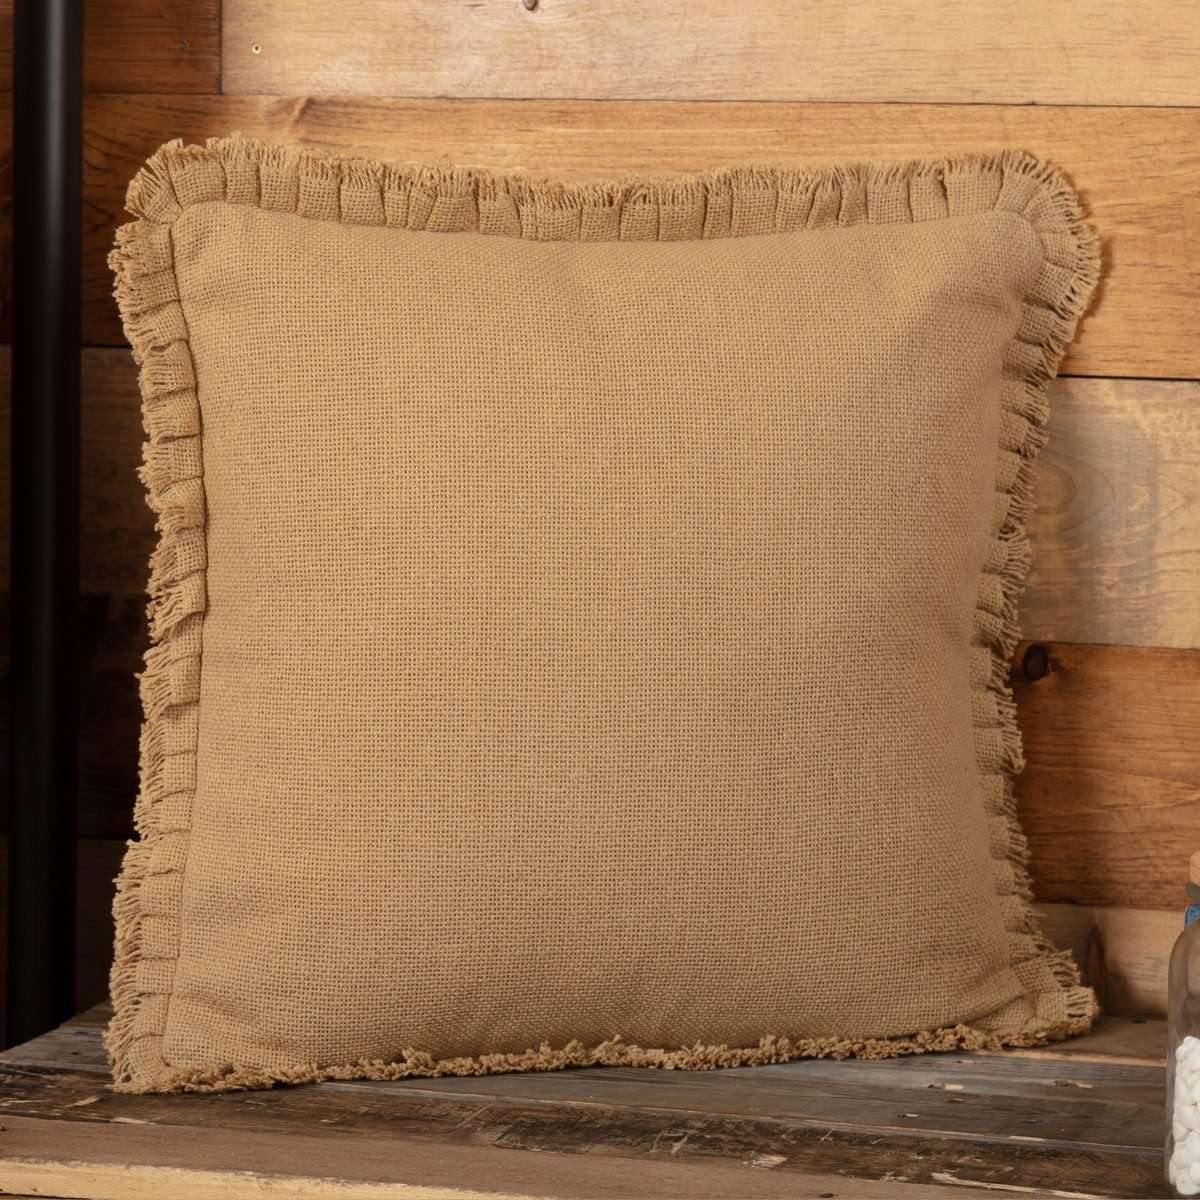 Burlap Natural Pillow w/ Fringed Ruffle 18x18 VHC Brands